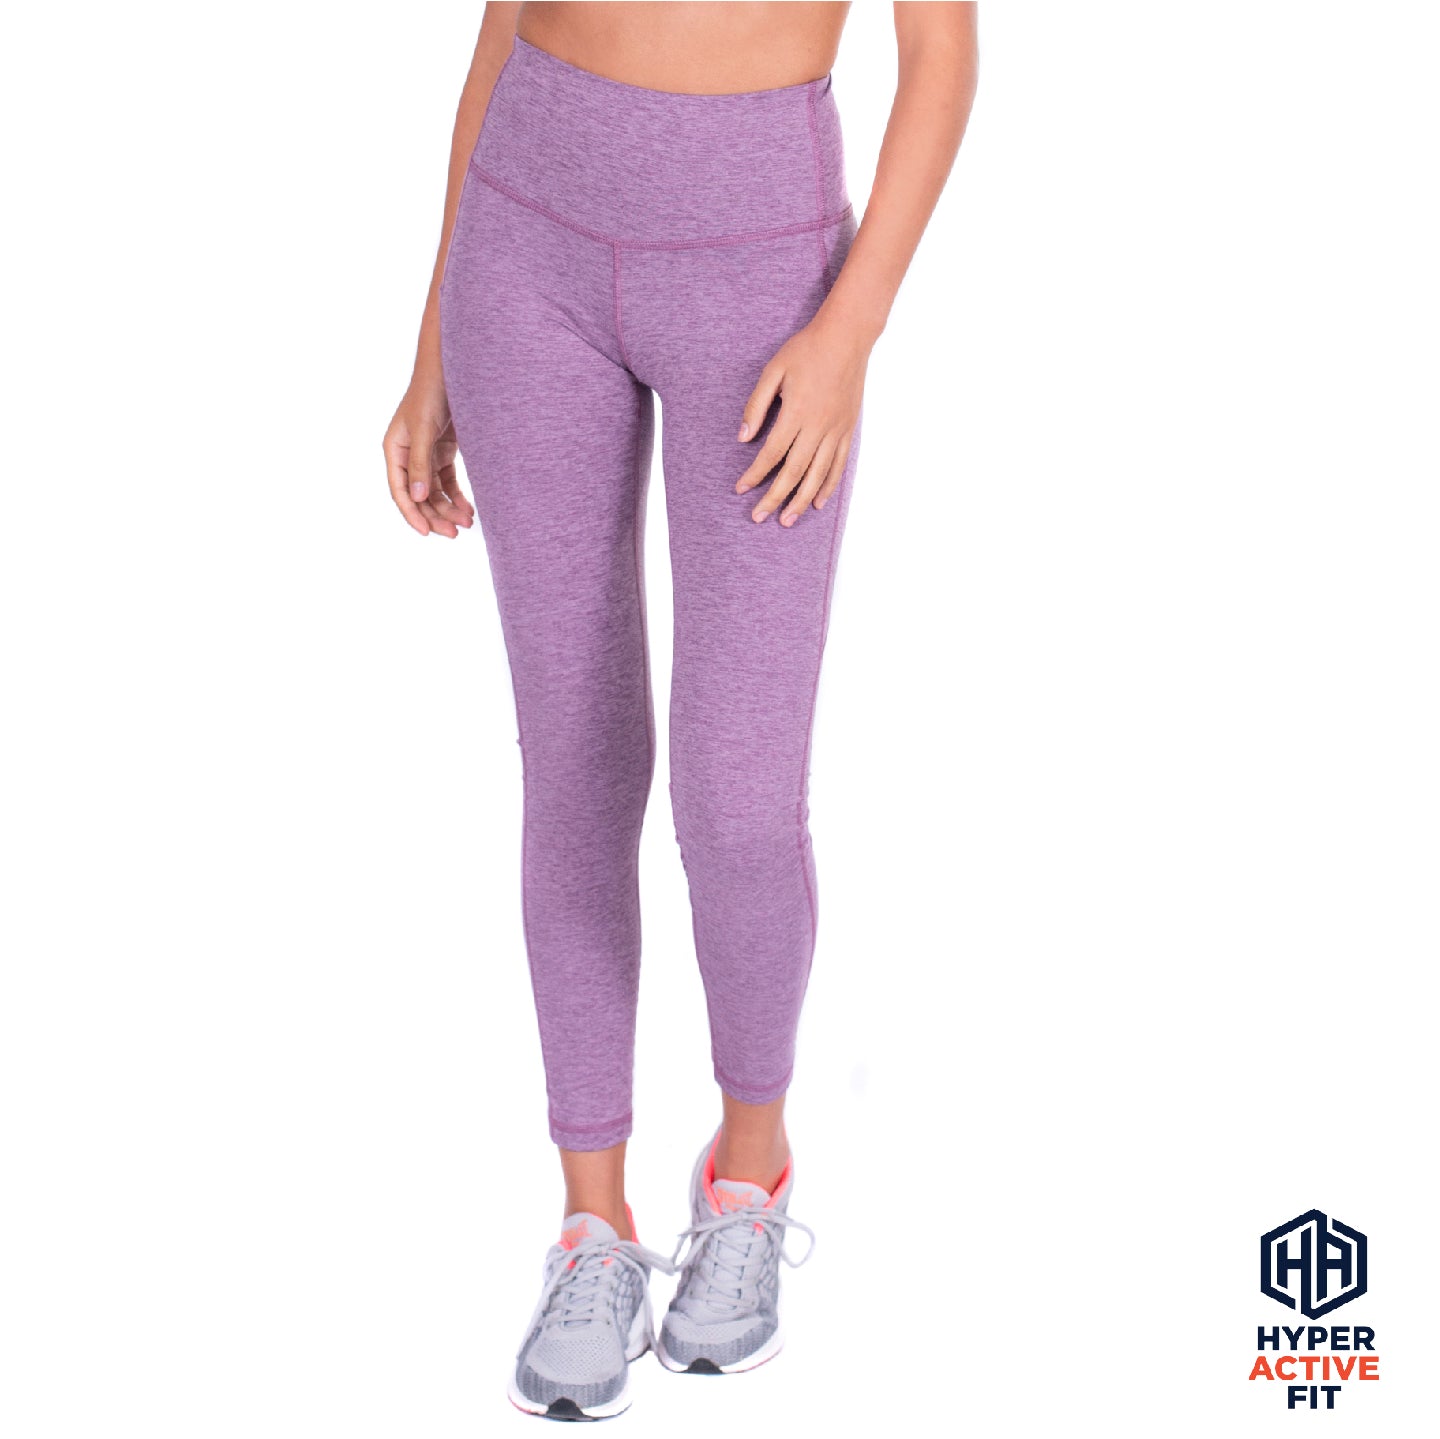 Recycle Dusty Lilac Long Legging